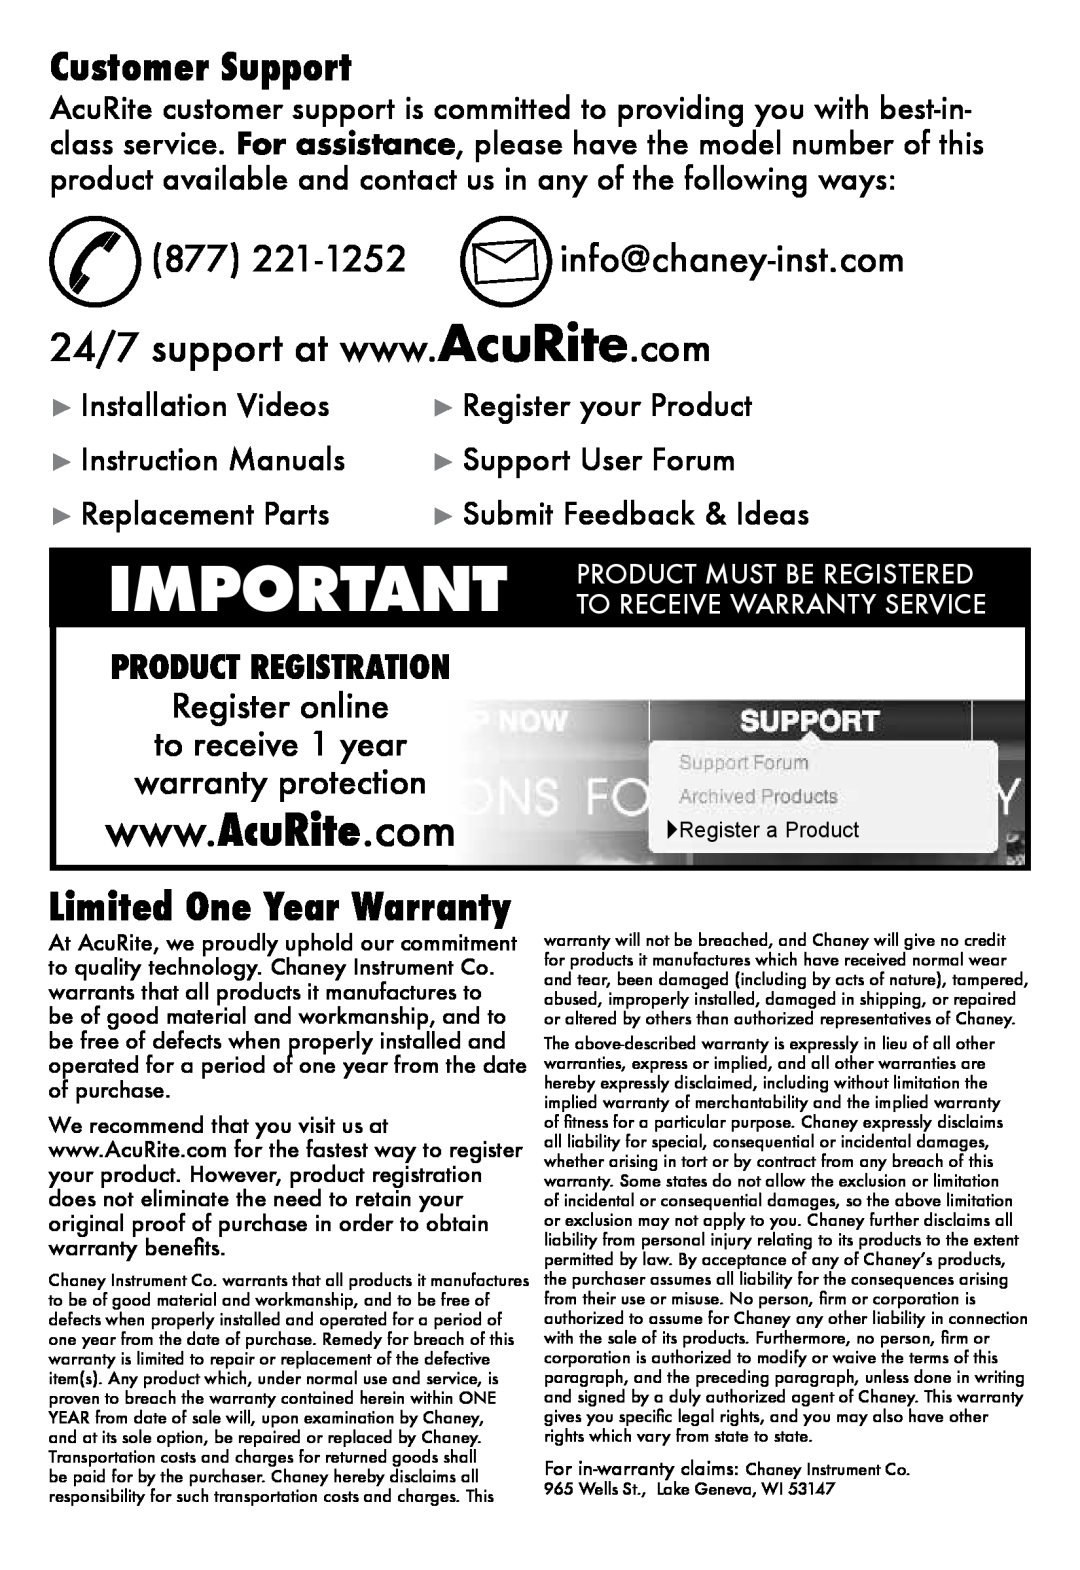 Acu-Rite 11146-3N1WC Customer Support, 877 221-1252 info@chaney-inst.com, Limited One Year Warranty, Register online 